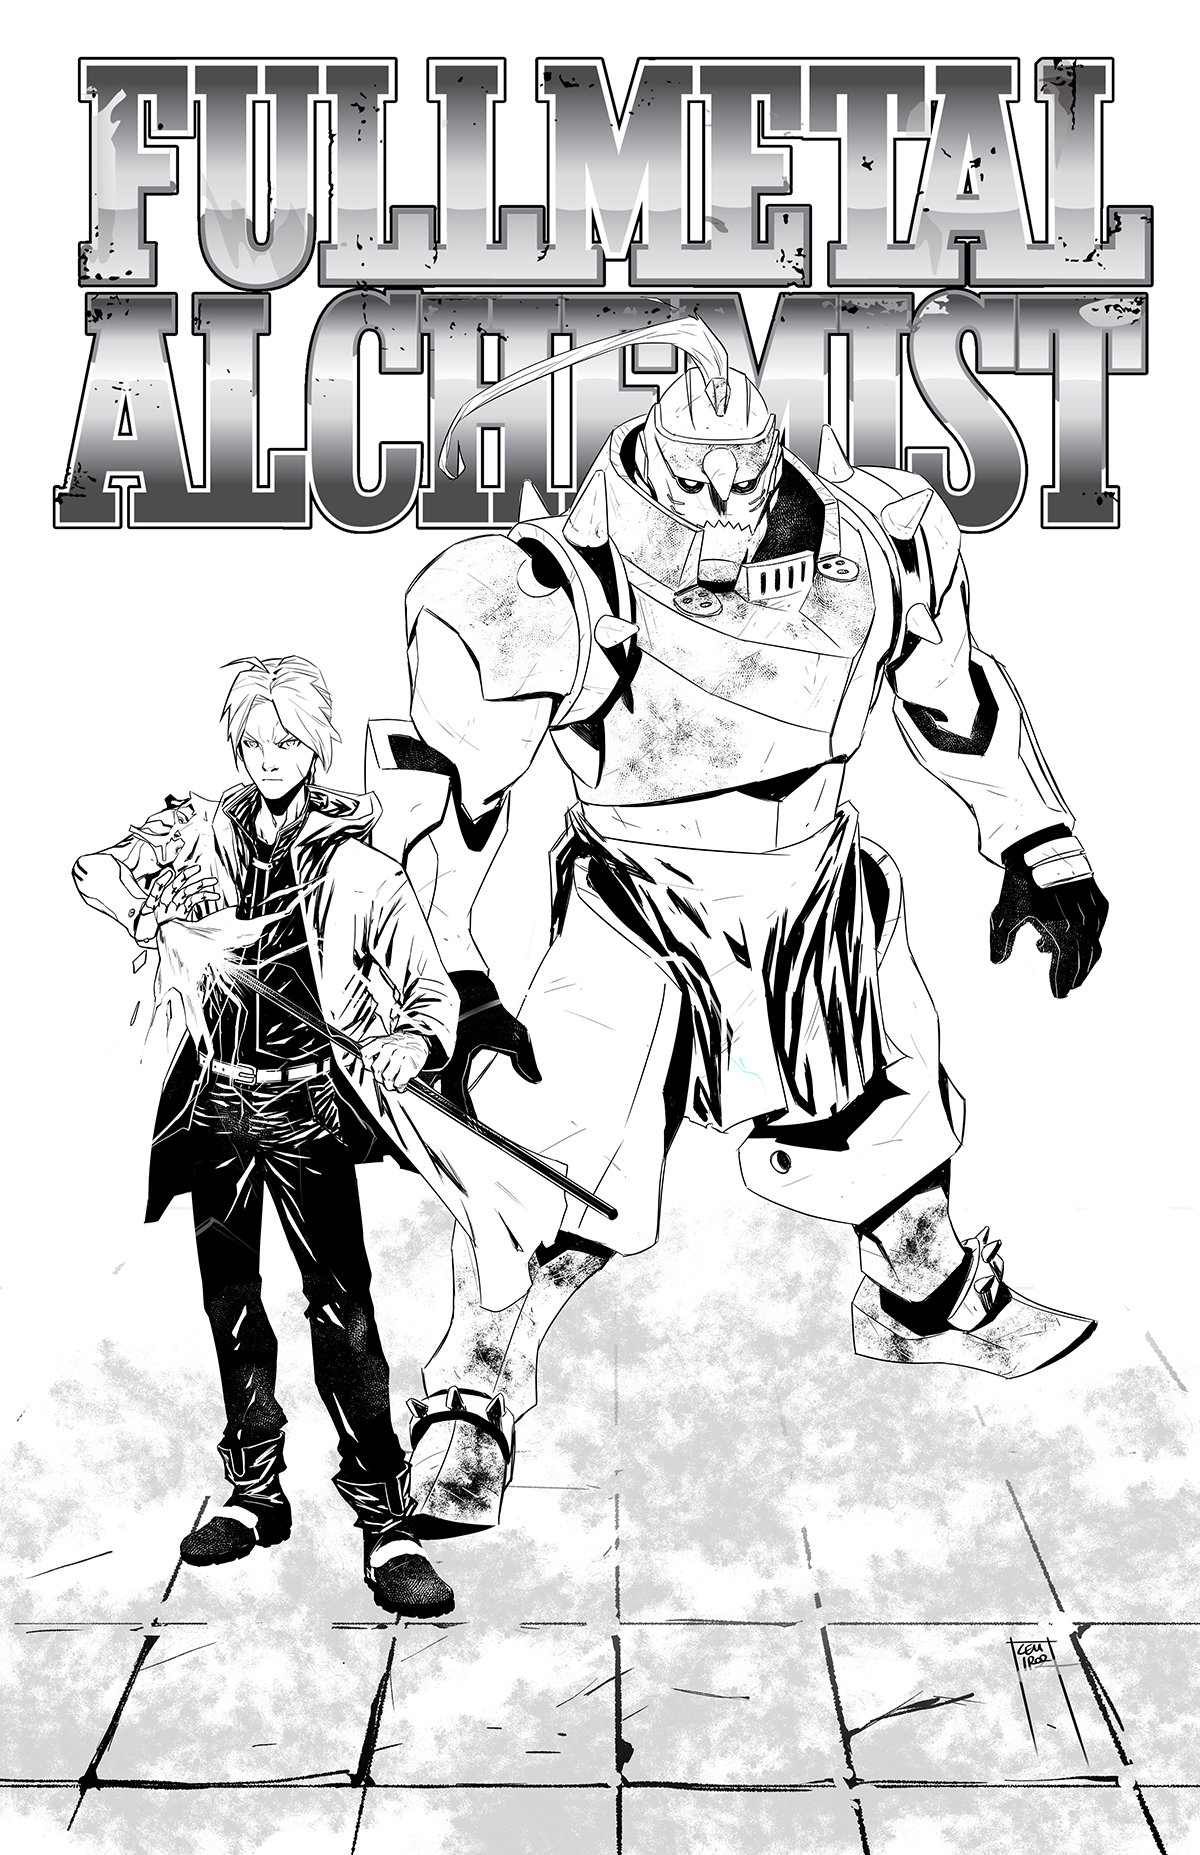 Featured image of post Elric Brothers Manga Other manga by the same author s